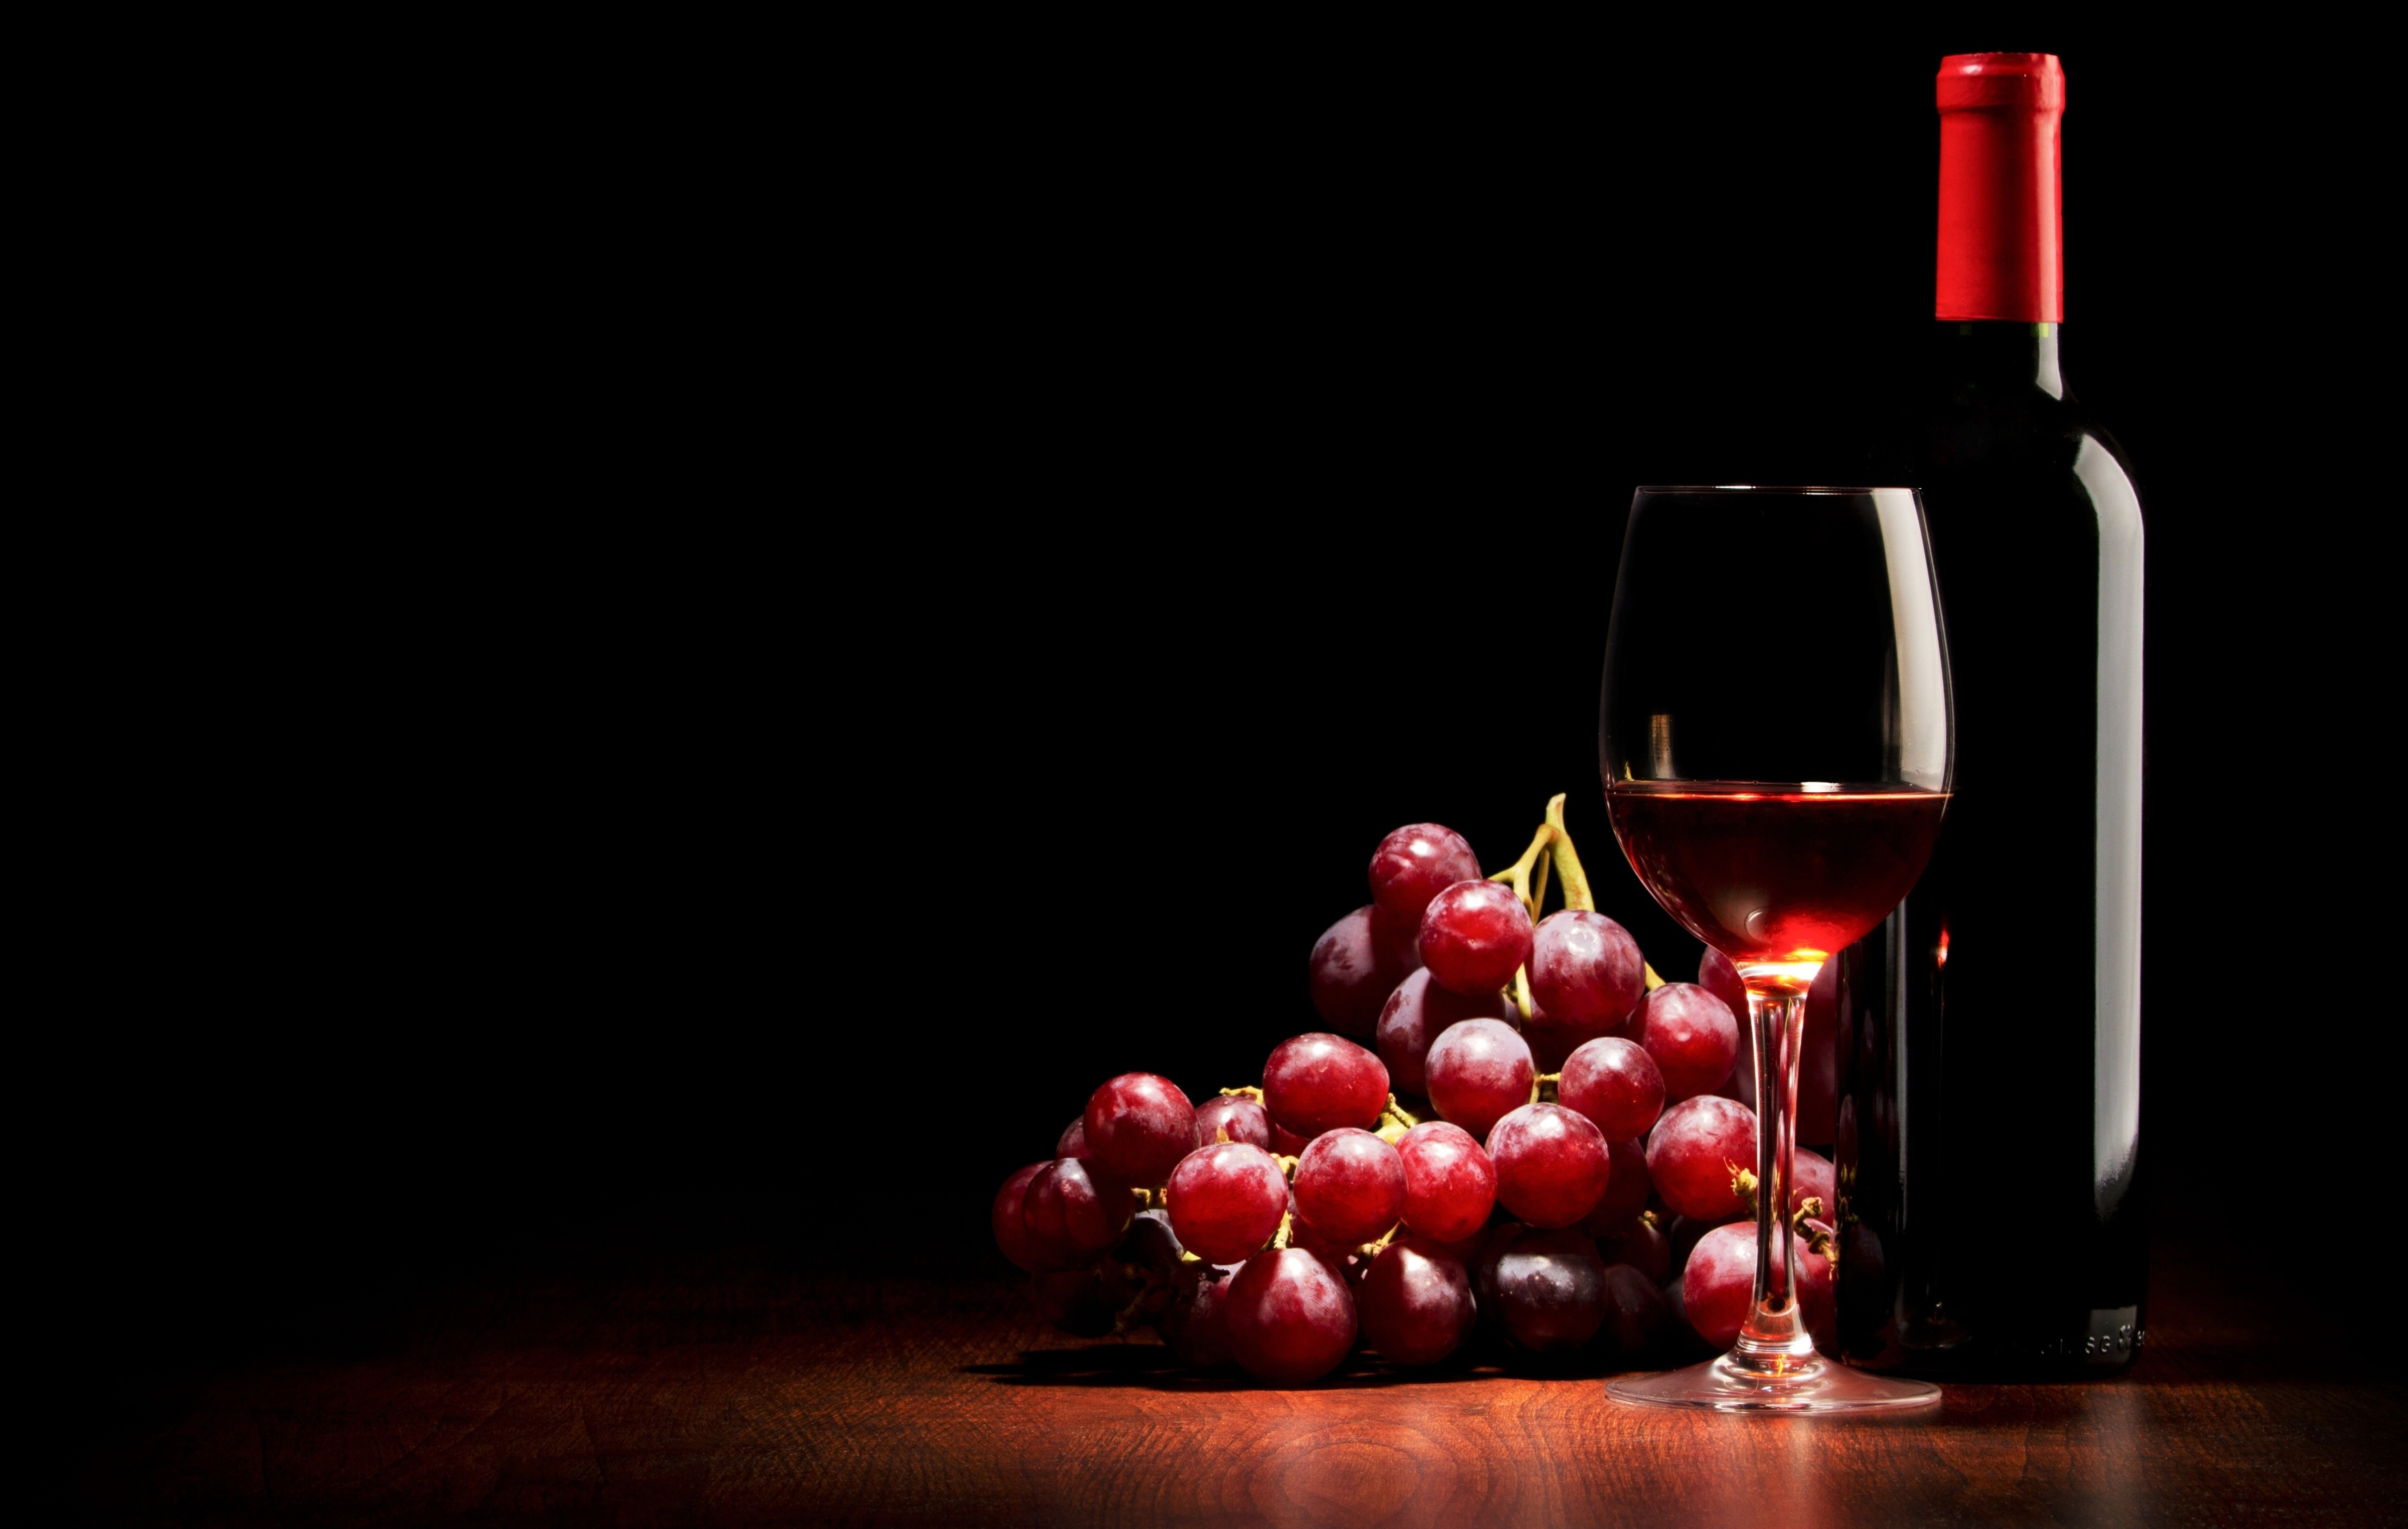 General 5040x3200 wine drink grapes red wine red dark food alcohol fruit berries black background simple background still life drinking glass bottles